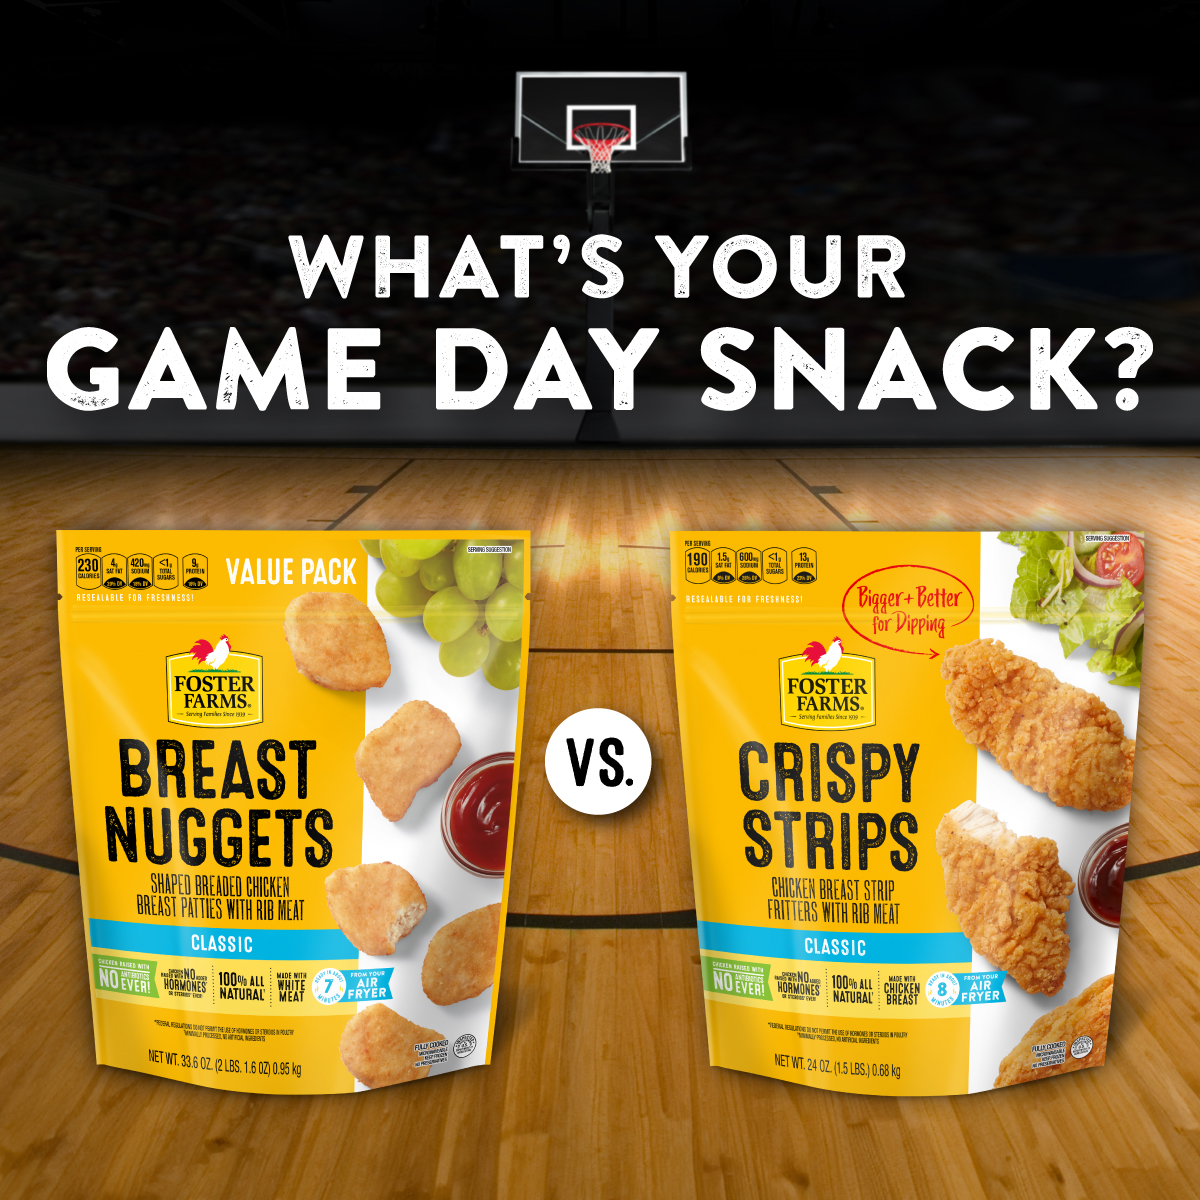 Team Chicken Strips or Team Nuggets? It's game day, and we know you're not playing when it comes to snacks! Let us know your pick below. 🏀 #fosterfarms #gameday #basketball #basketballgame #gamedaysnacks #appetizers #easymeals #crispystrips #chicken #chickennuggets #nuggets